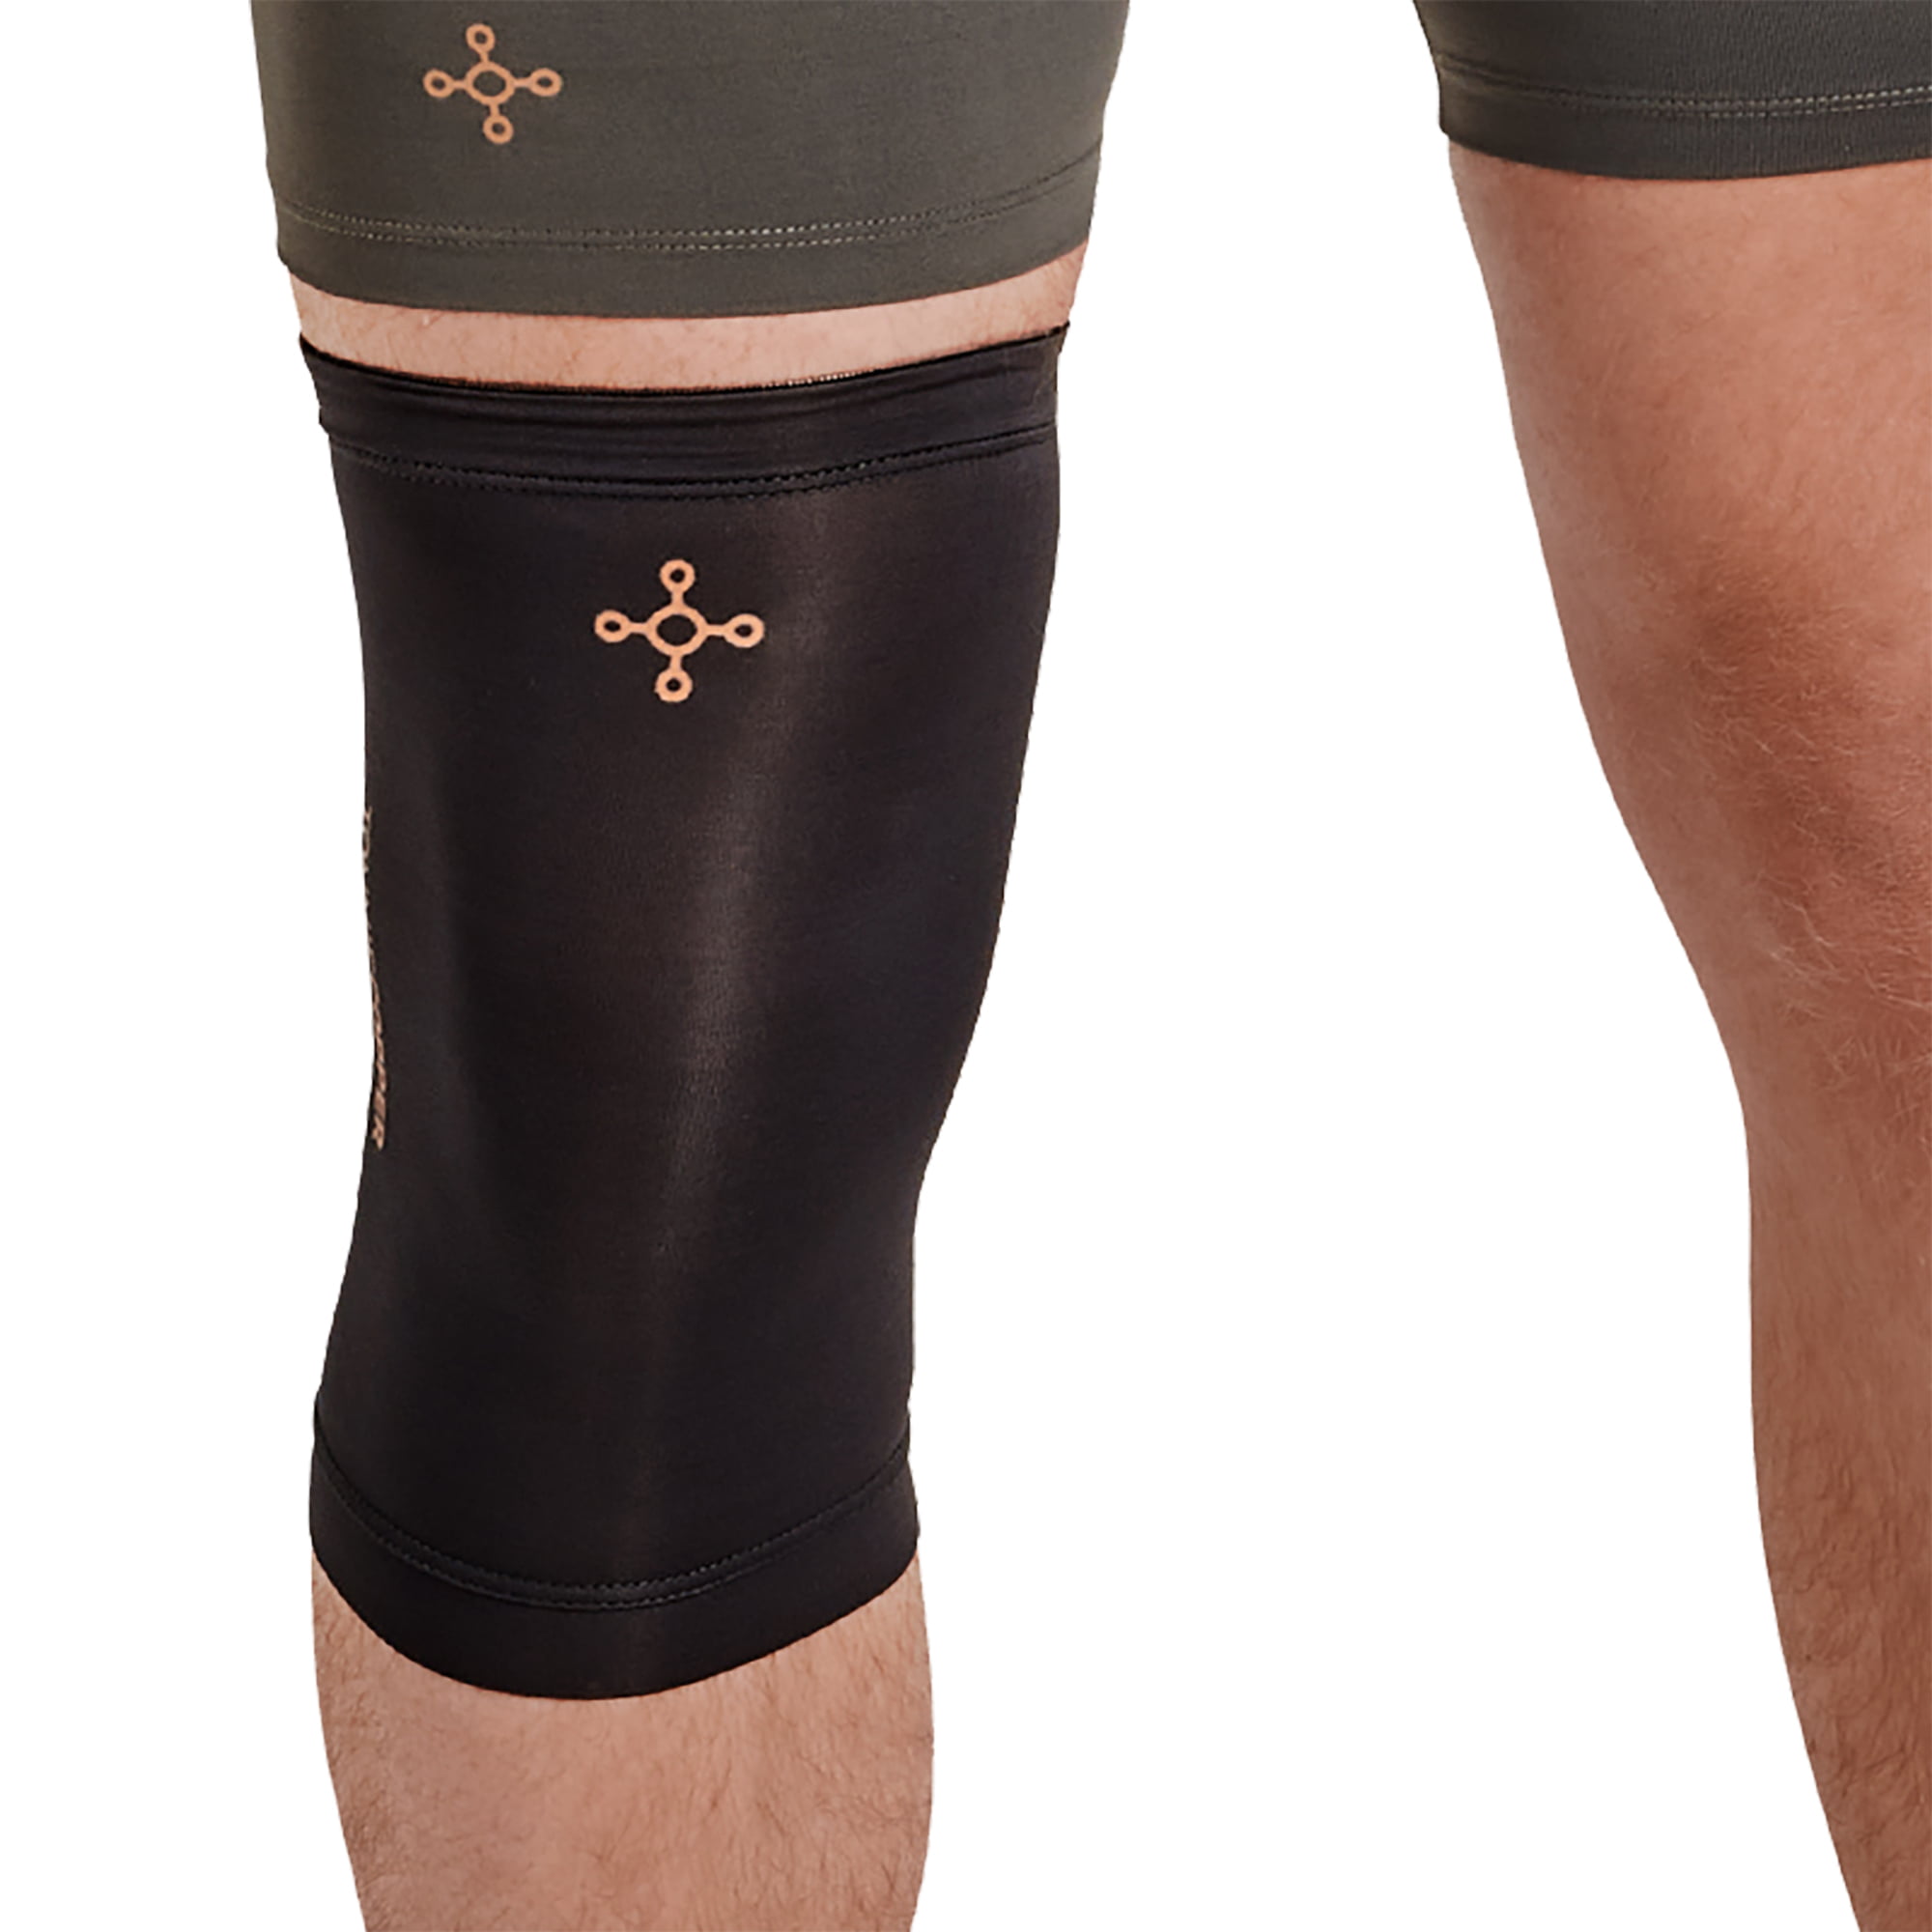 TOMMIE COPPER Unisex Compression Knee Sleeves NWOT 